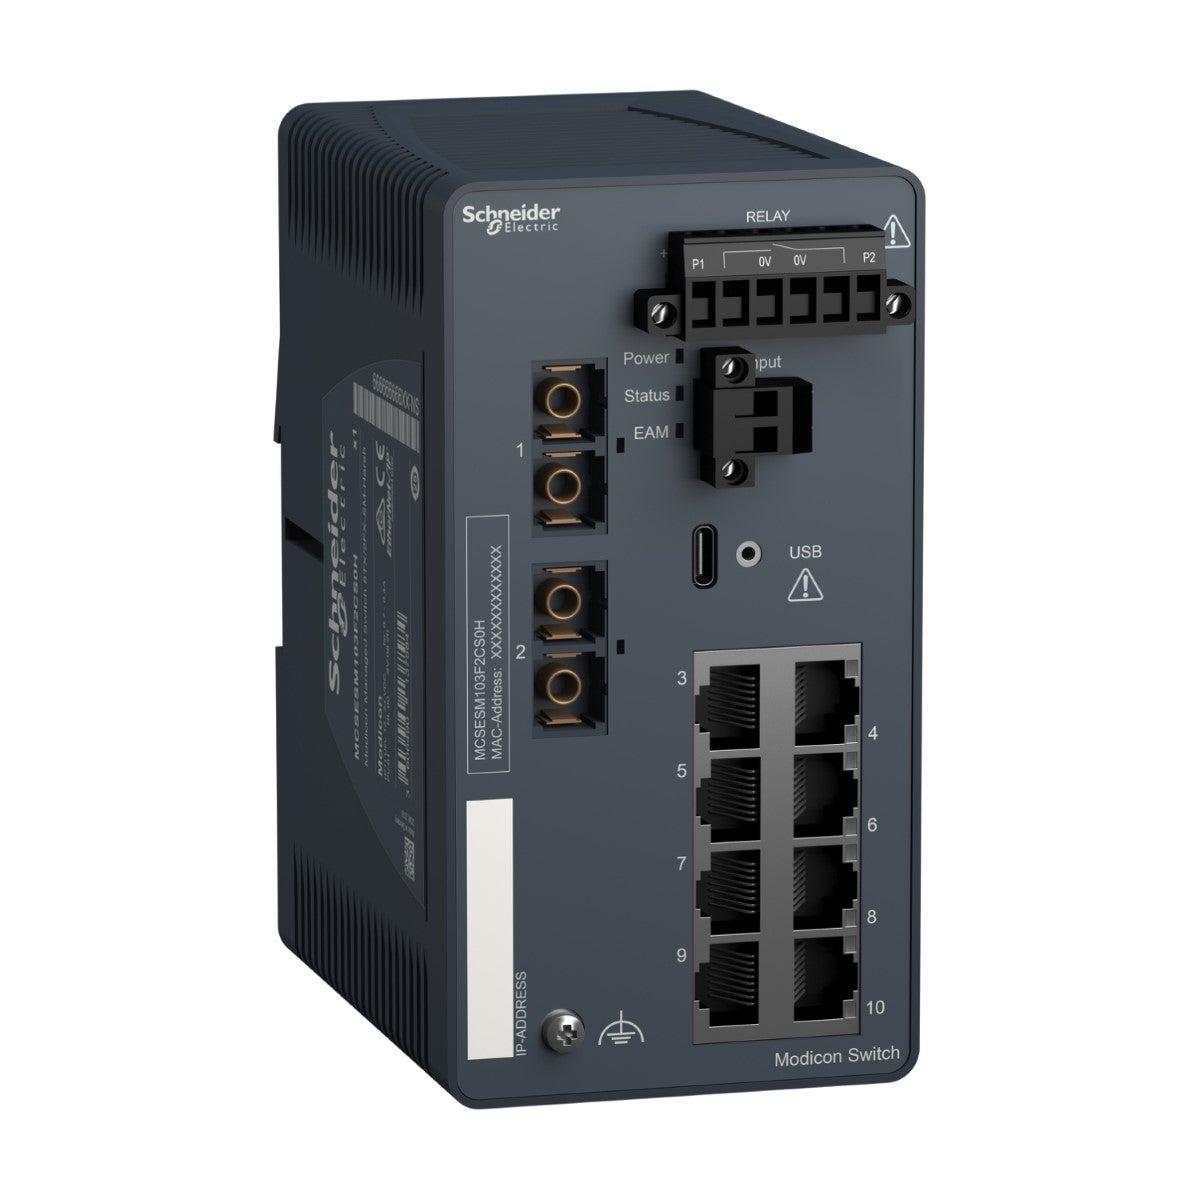 Modicon Managed Switch - 8 ports for copper + 2 ports for fiber optic single-mode - Harsh